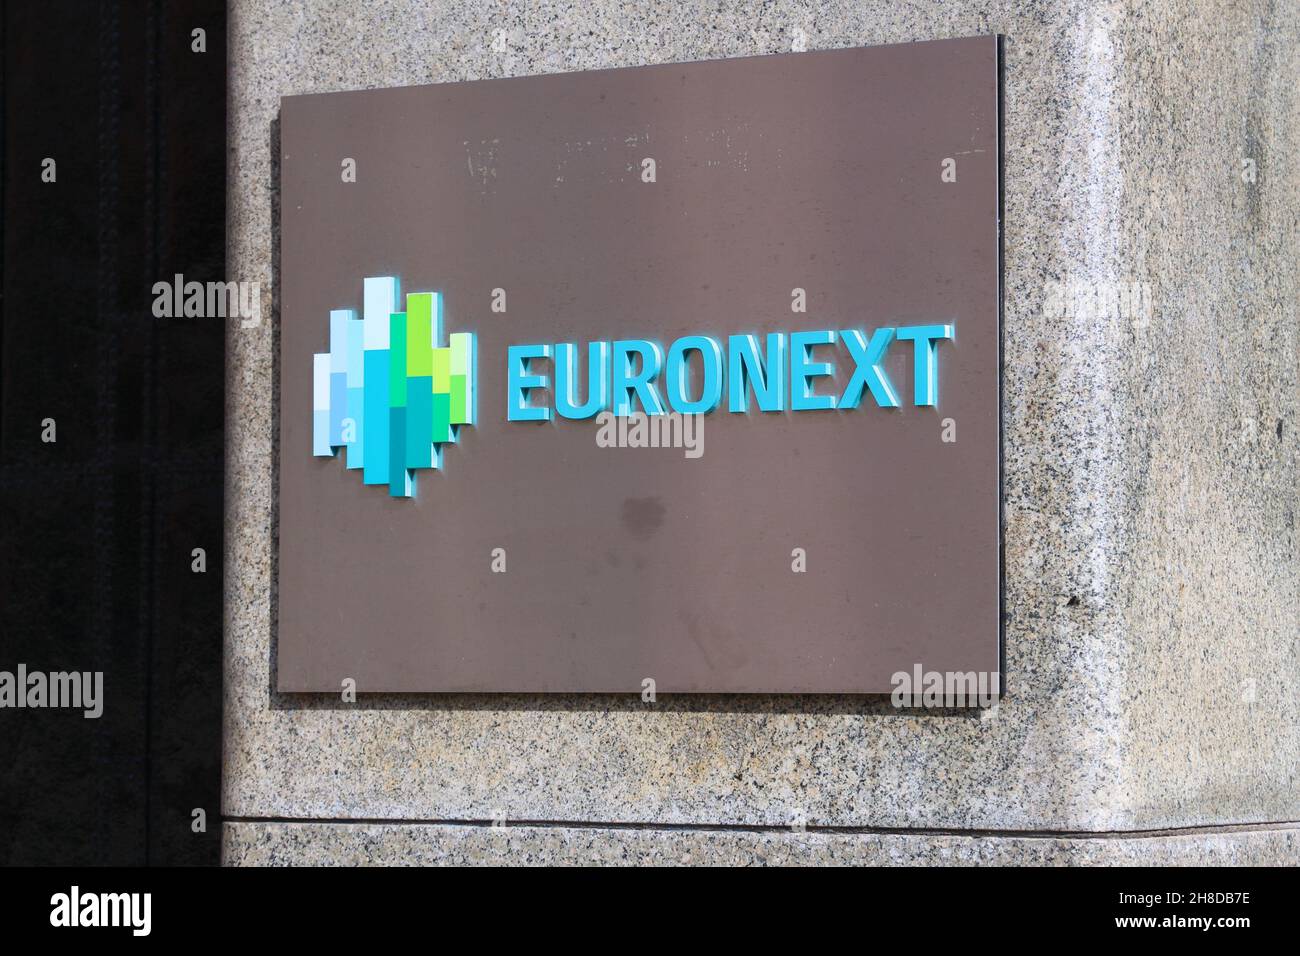 AMSTERDAM, NETHERLANDS - JULY 9, 2017: Euronext sign in Amsterdam. Euronext NV is a European stock exchange in Amsterdam, Brussels, London, Lisbon and Stock Photo